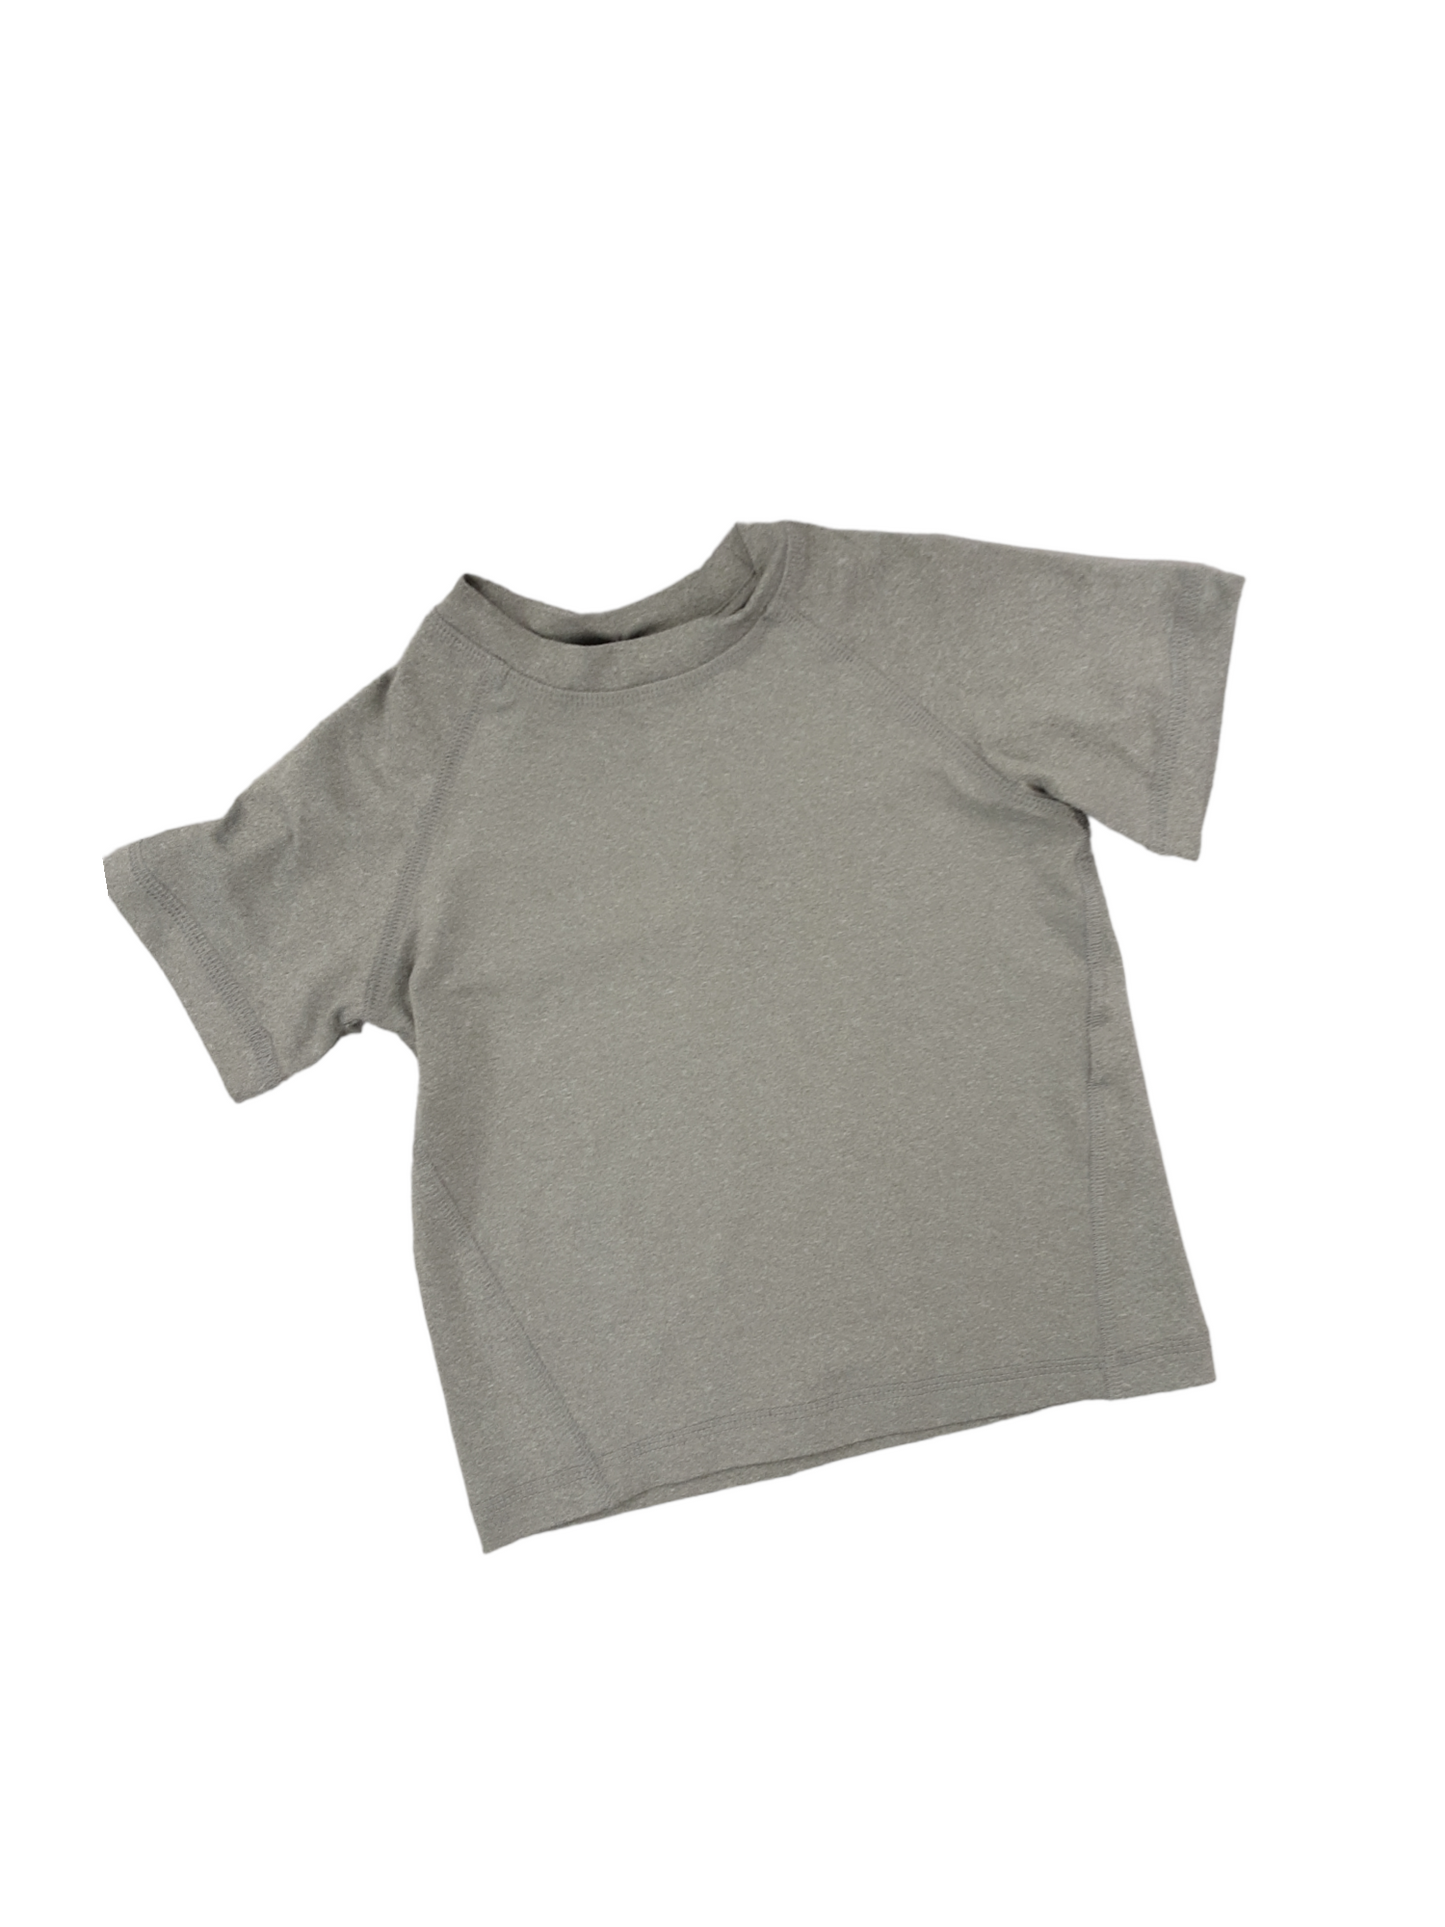 Grey athletic tee size 2t